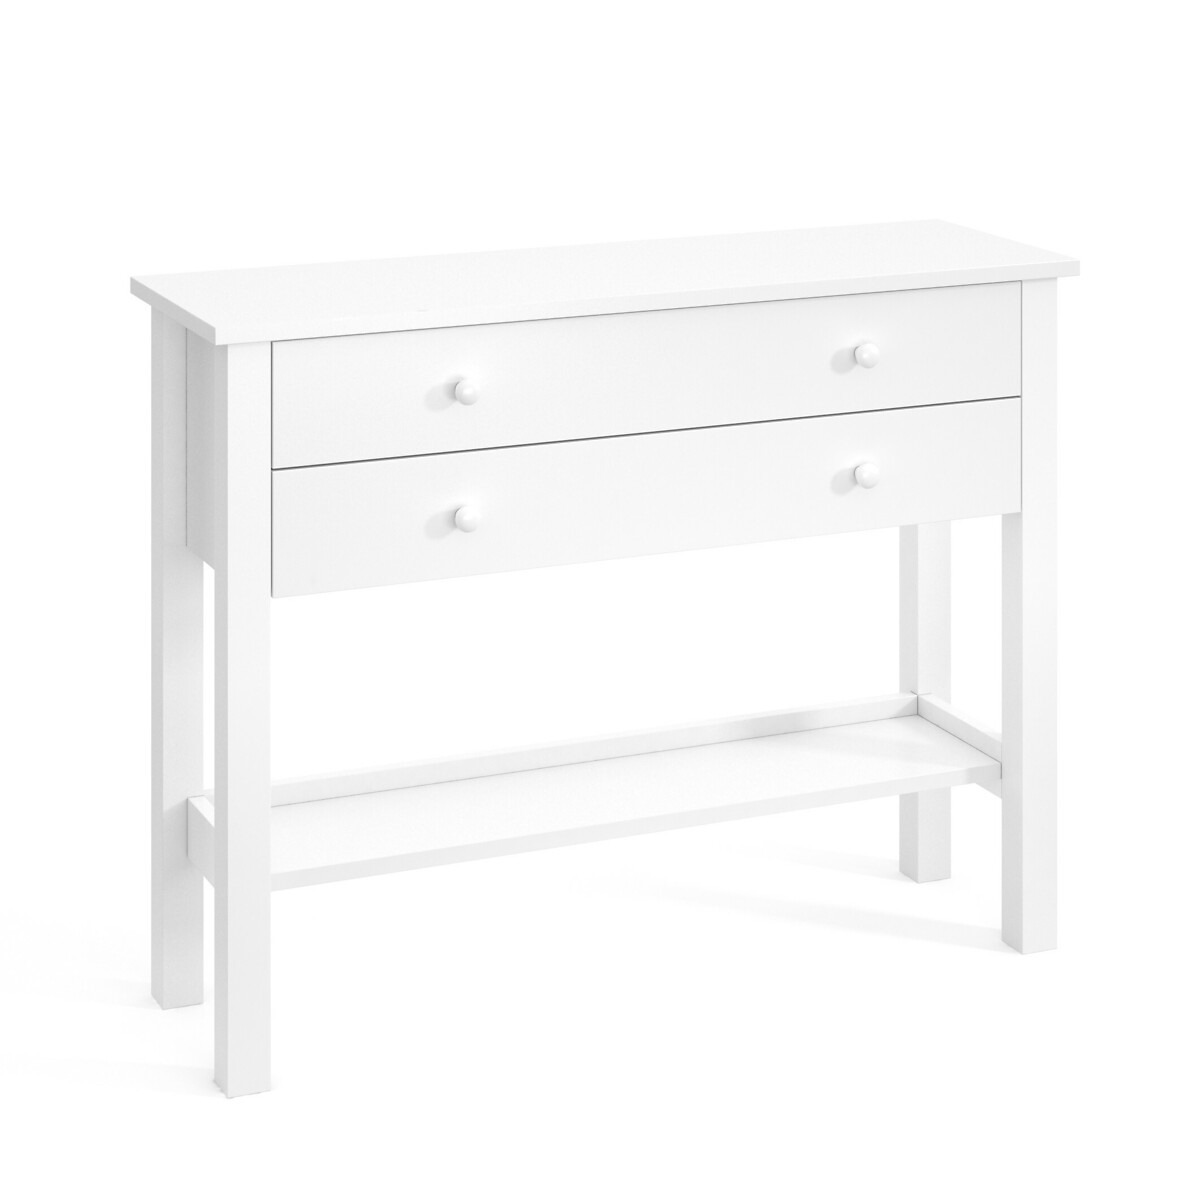 Perrine Solid Pine Console - image 1